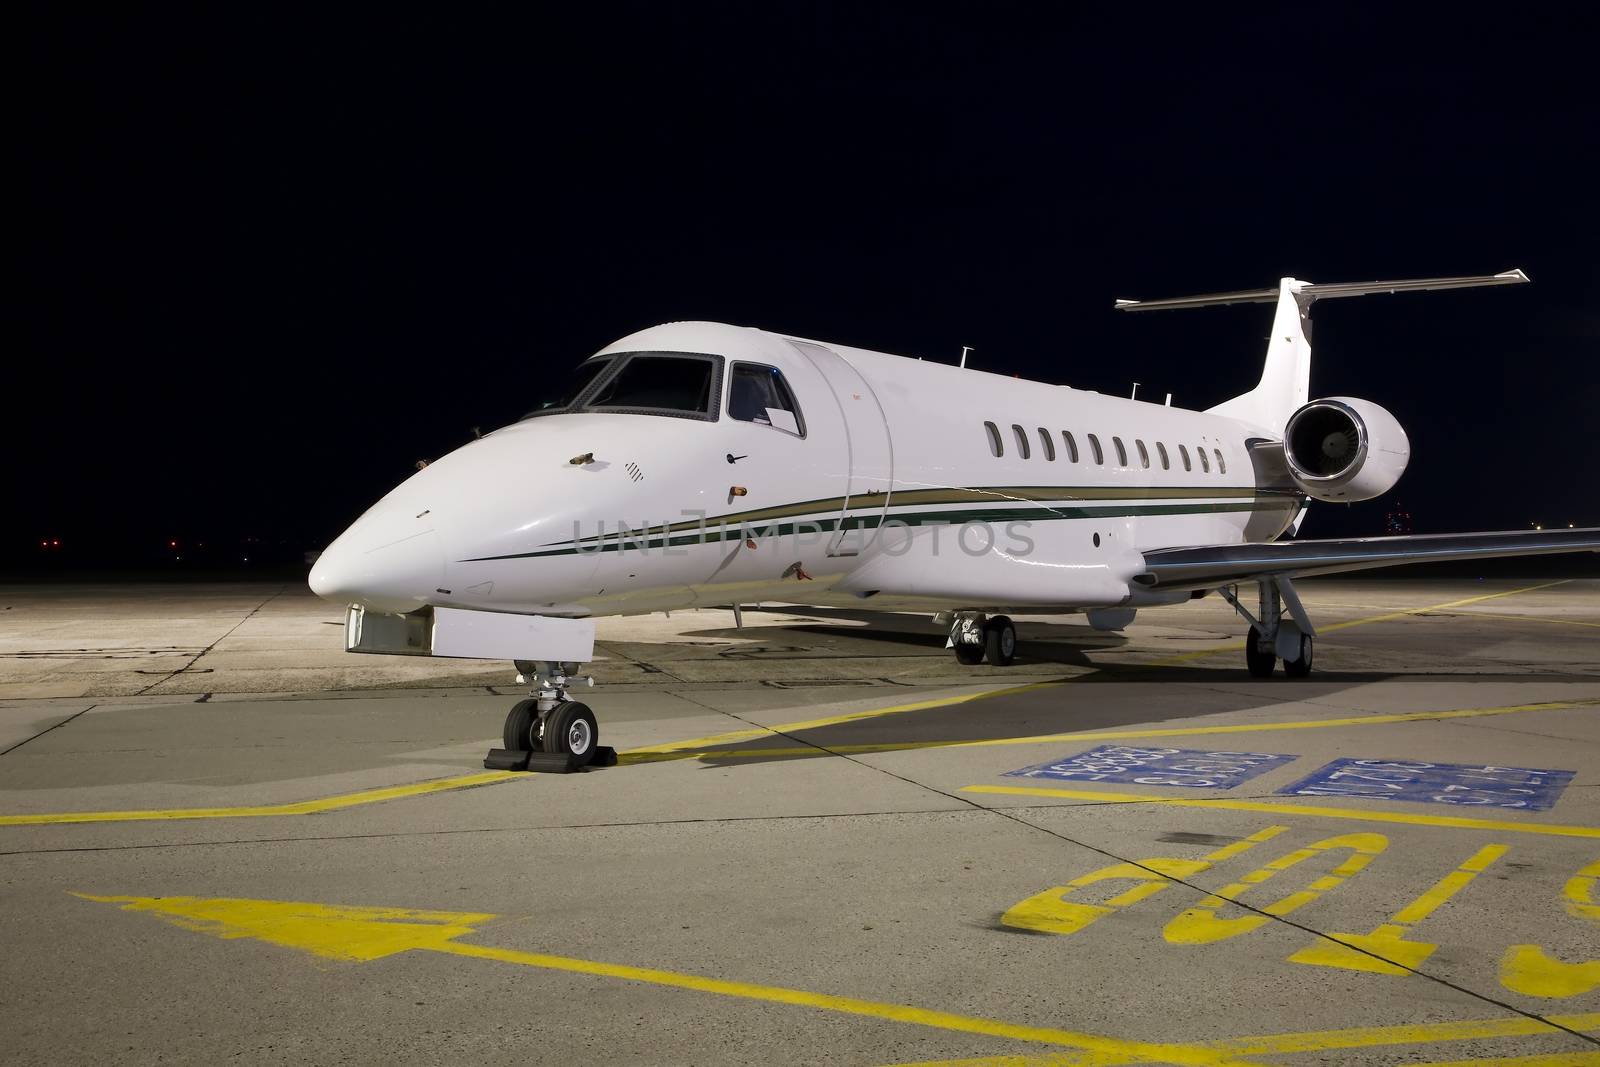 Small jet plane parked at night